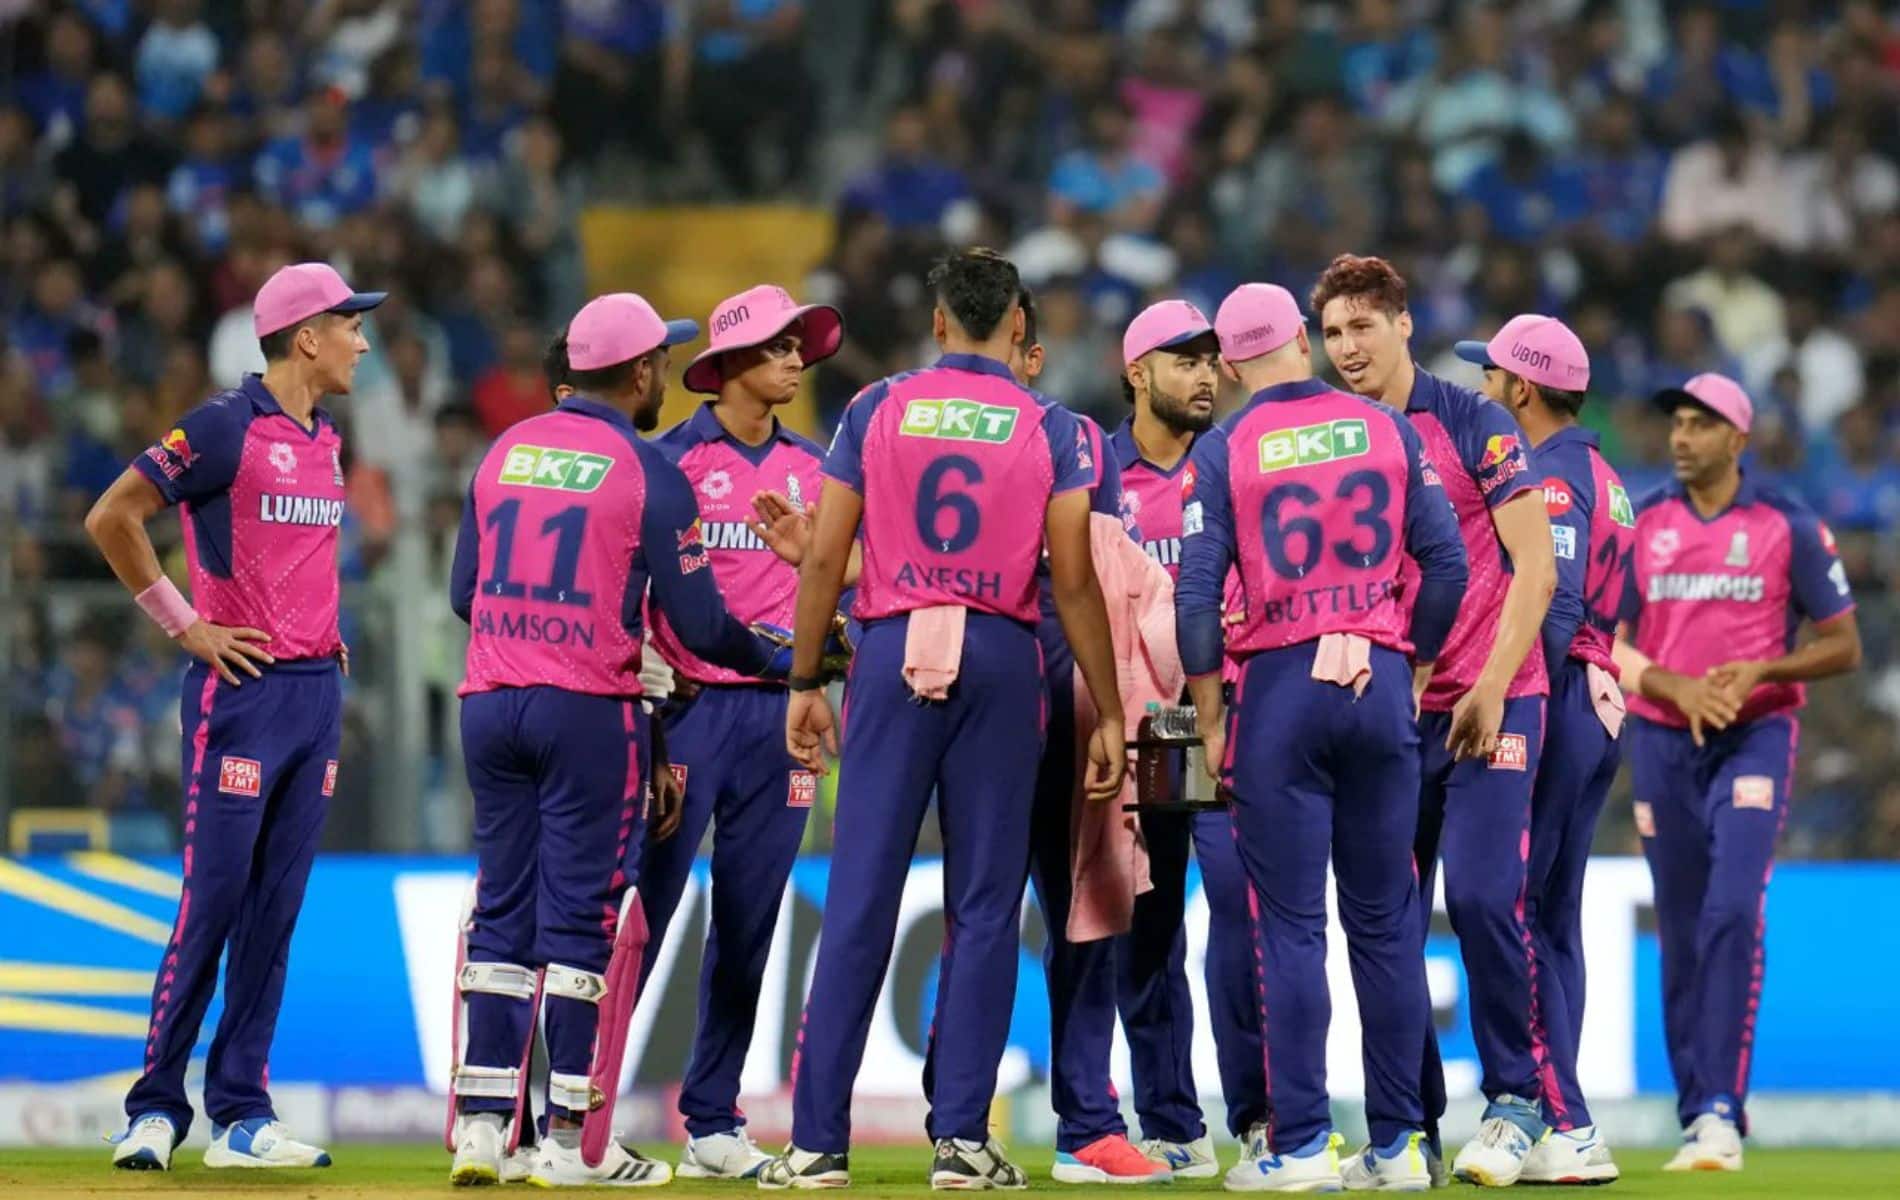 Rajasthan Royals players having a grouping during a game (X.com)